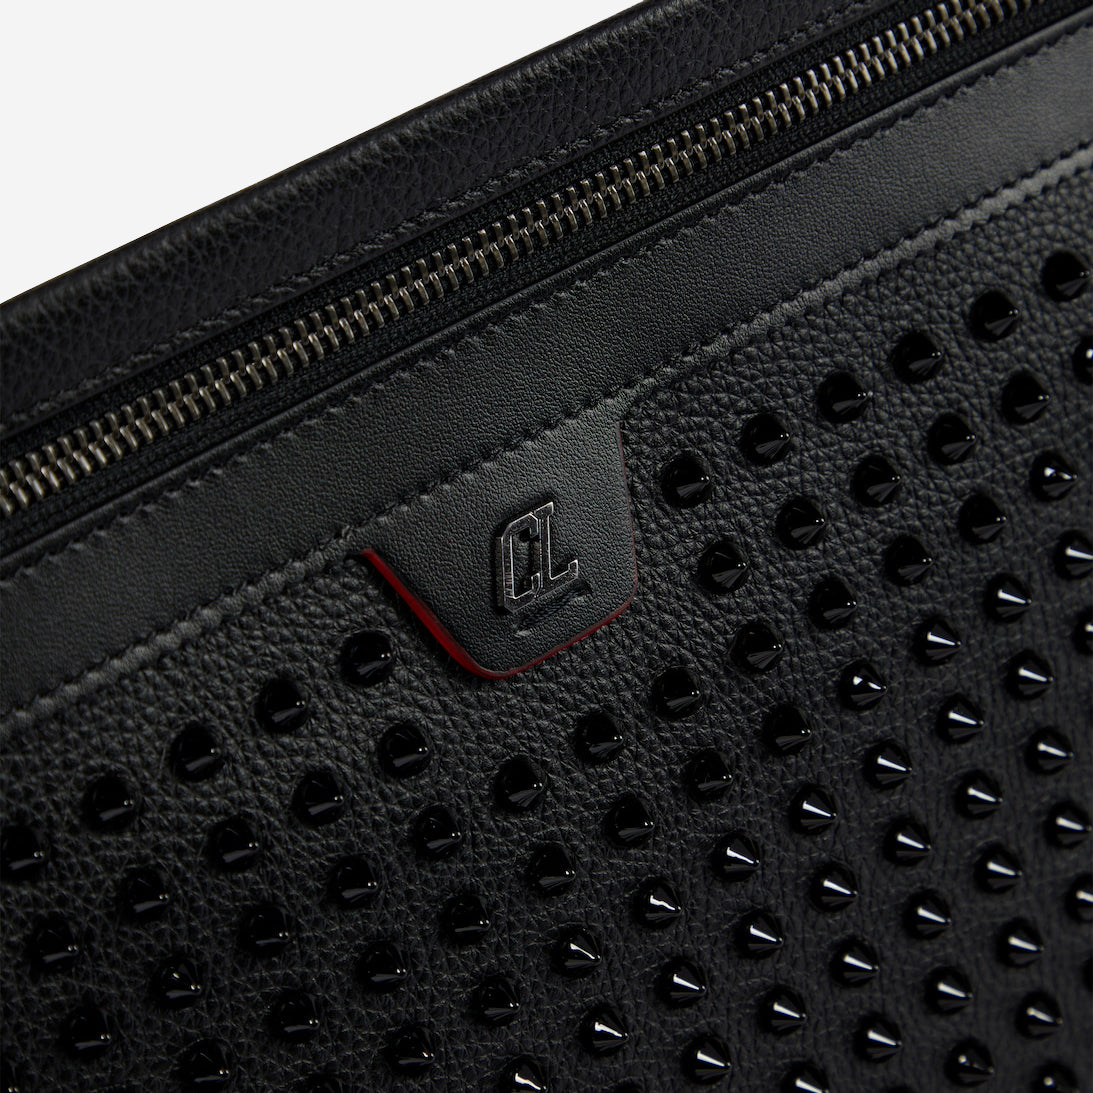 Christian Louboutin Studded Citypouch